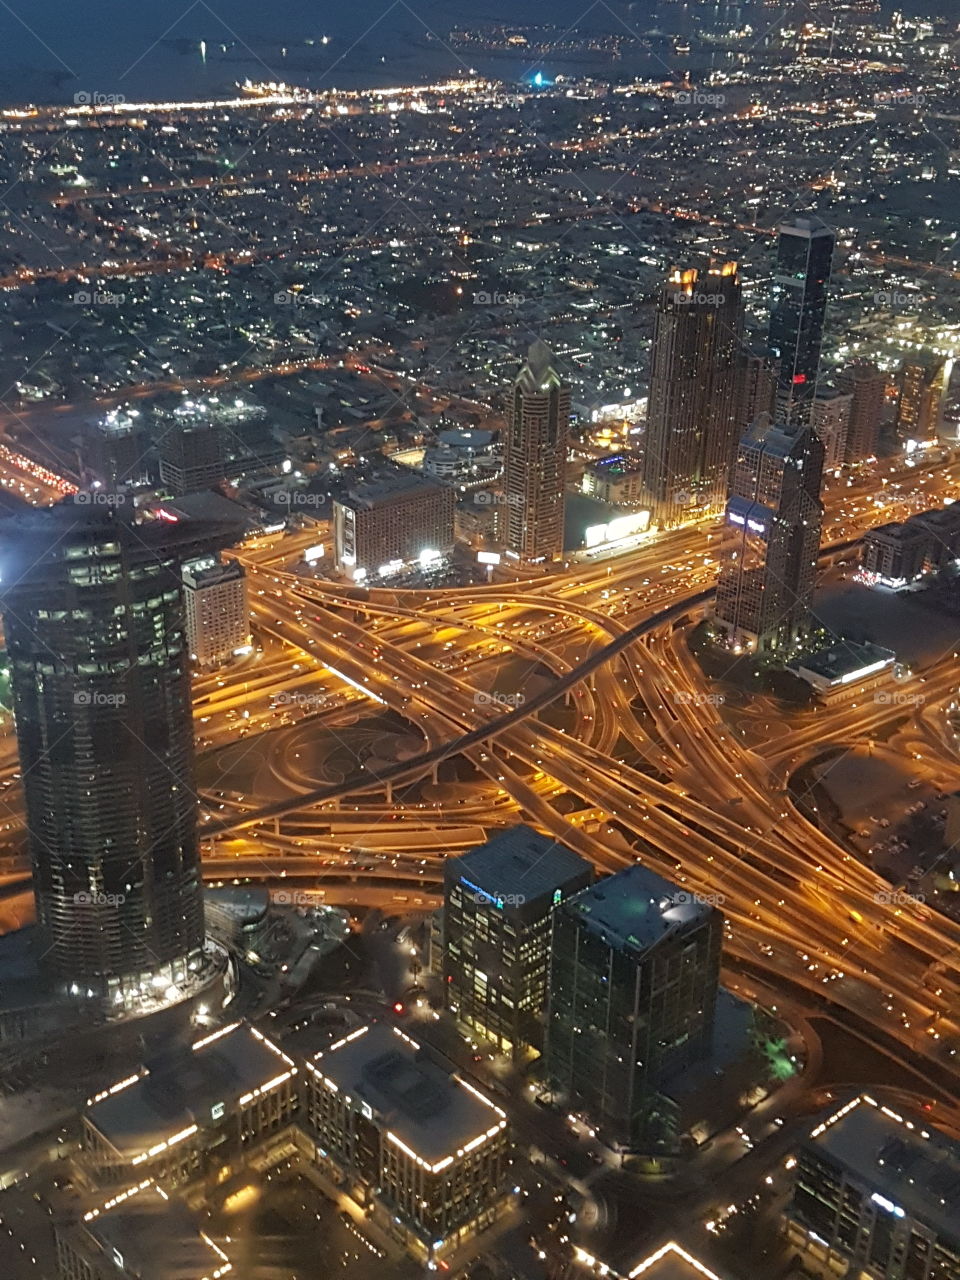 Night lights of the pearl of the east, Dubai city